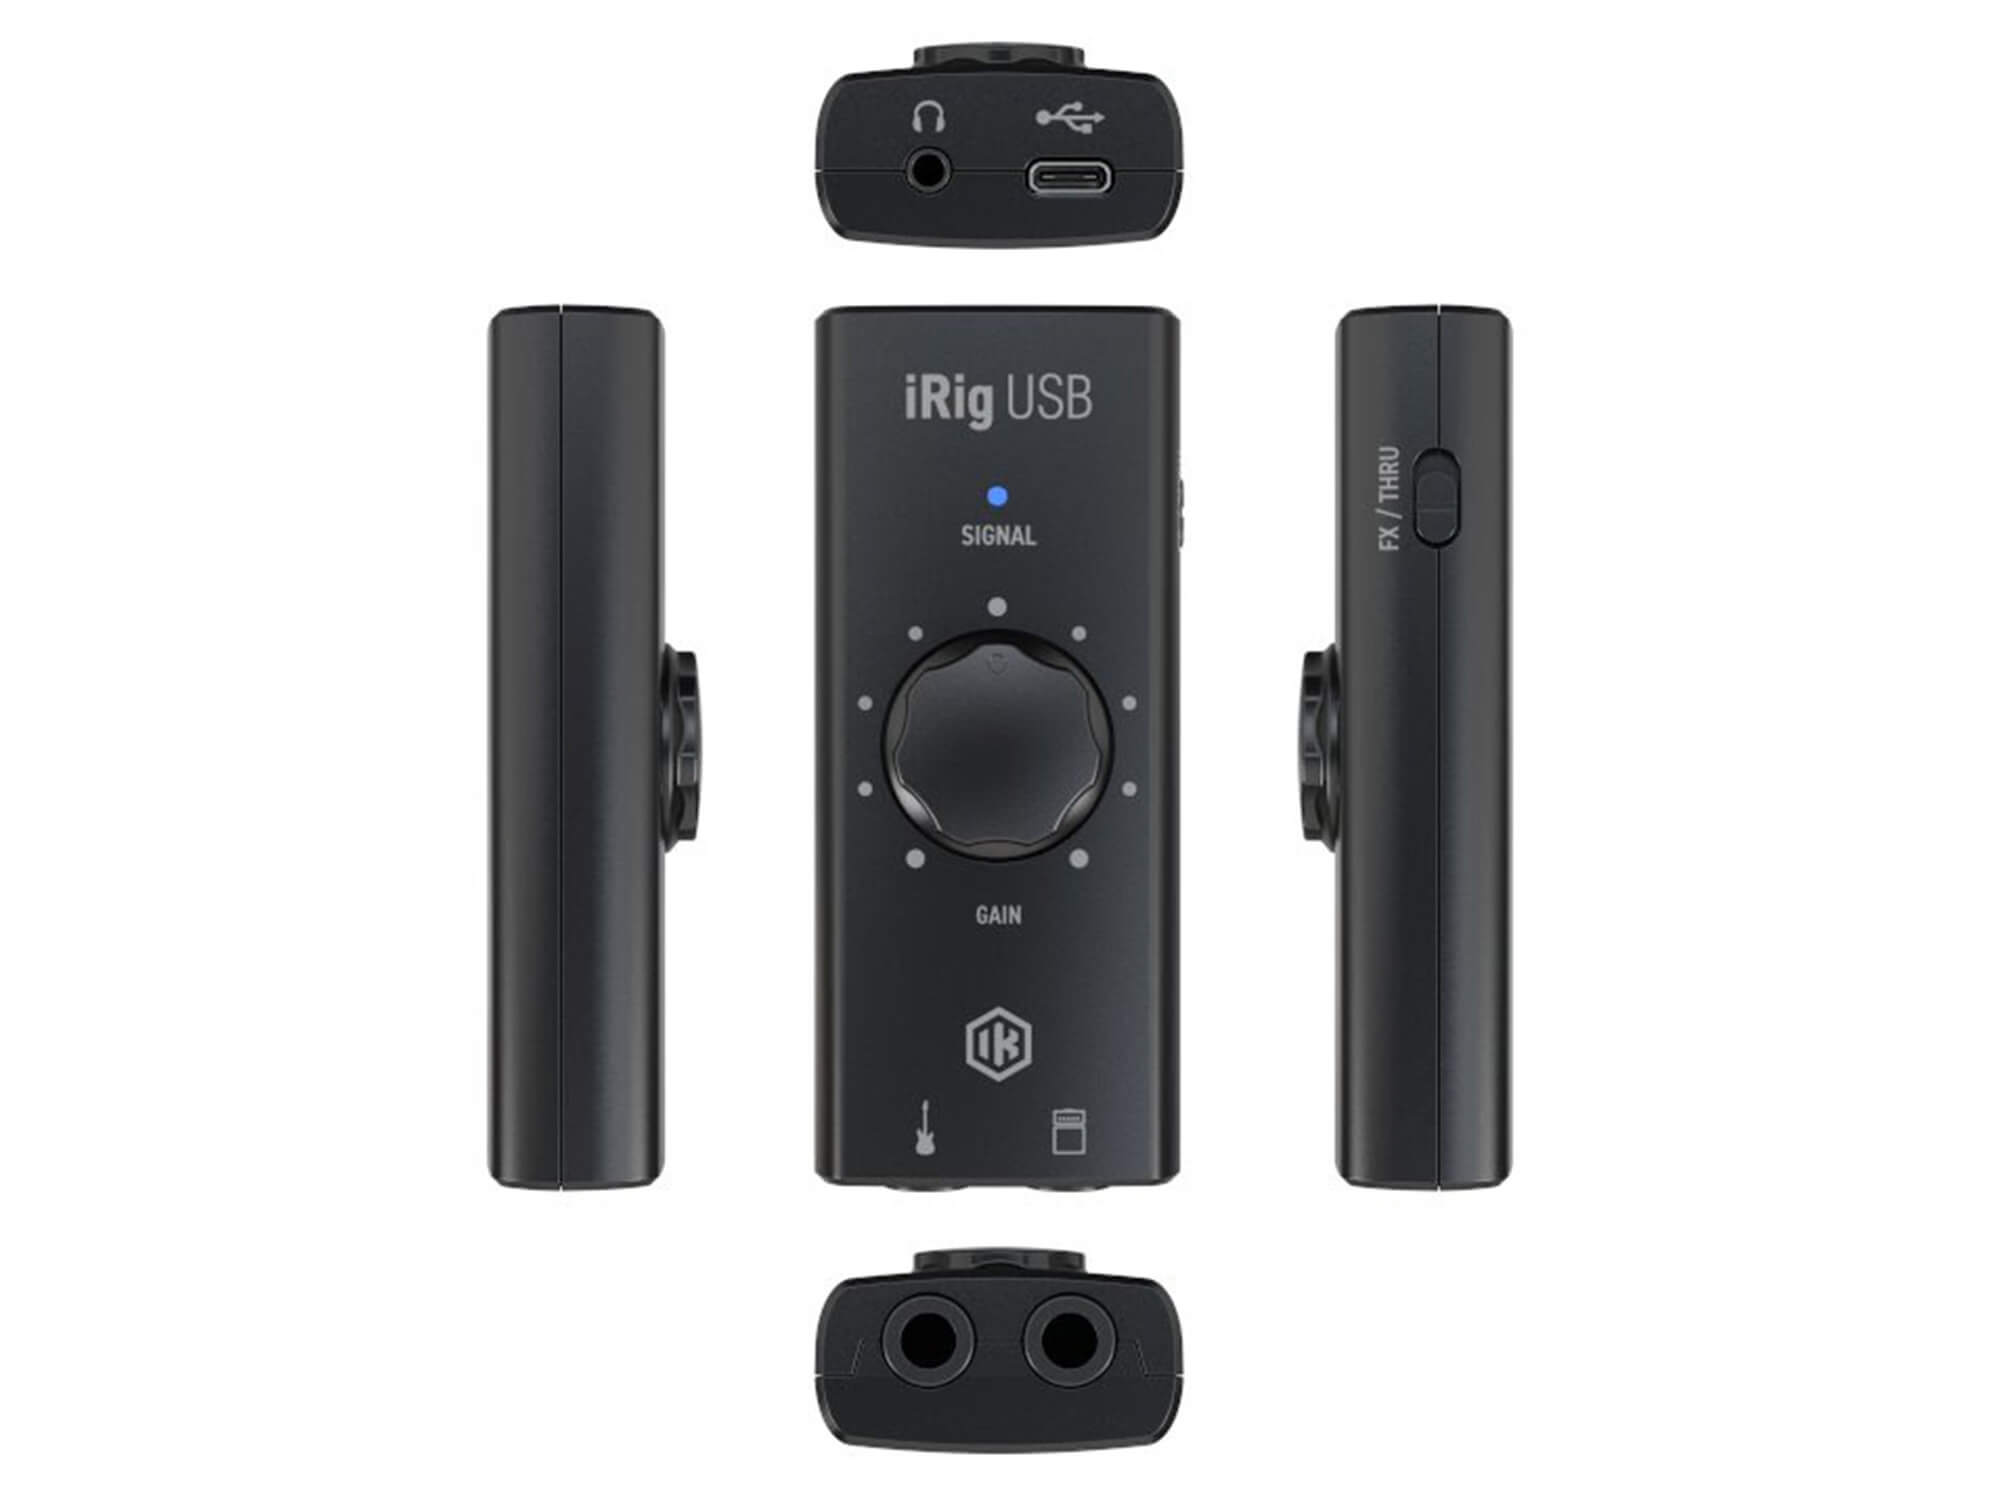 iRig USB - small black interface with a large dial, shown from five different angles.